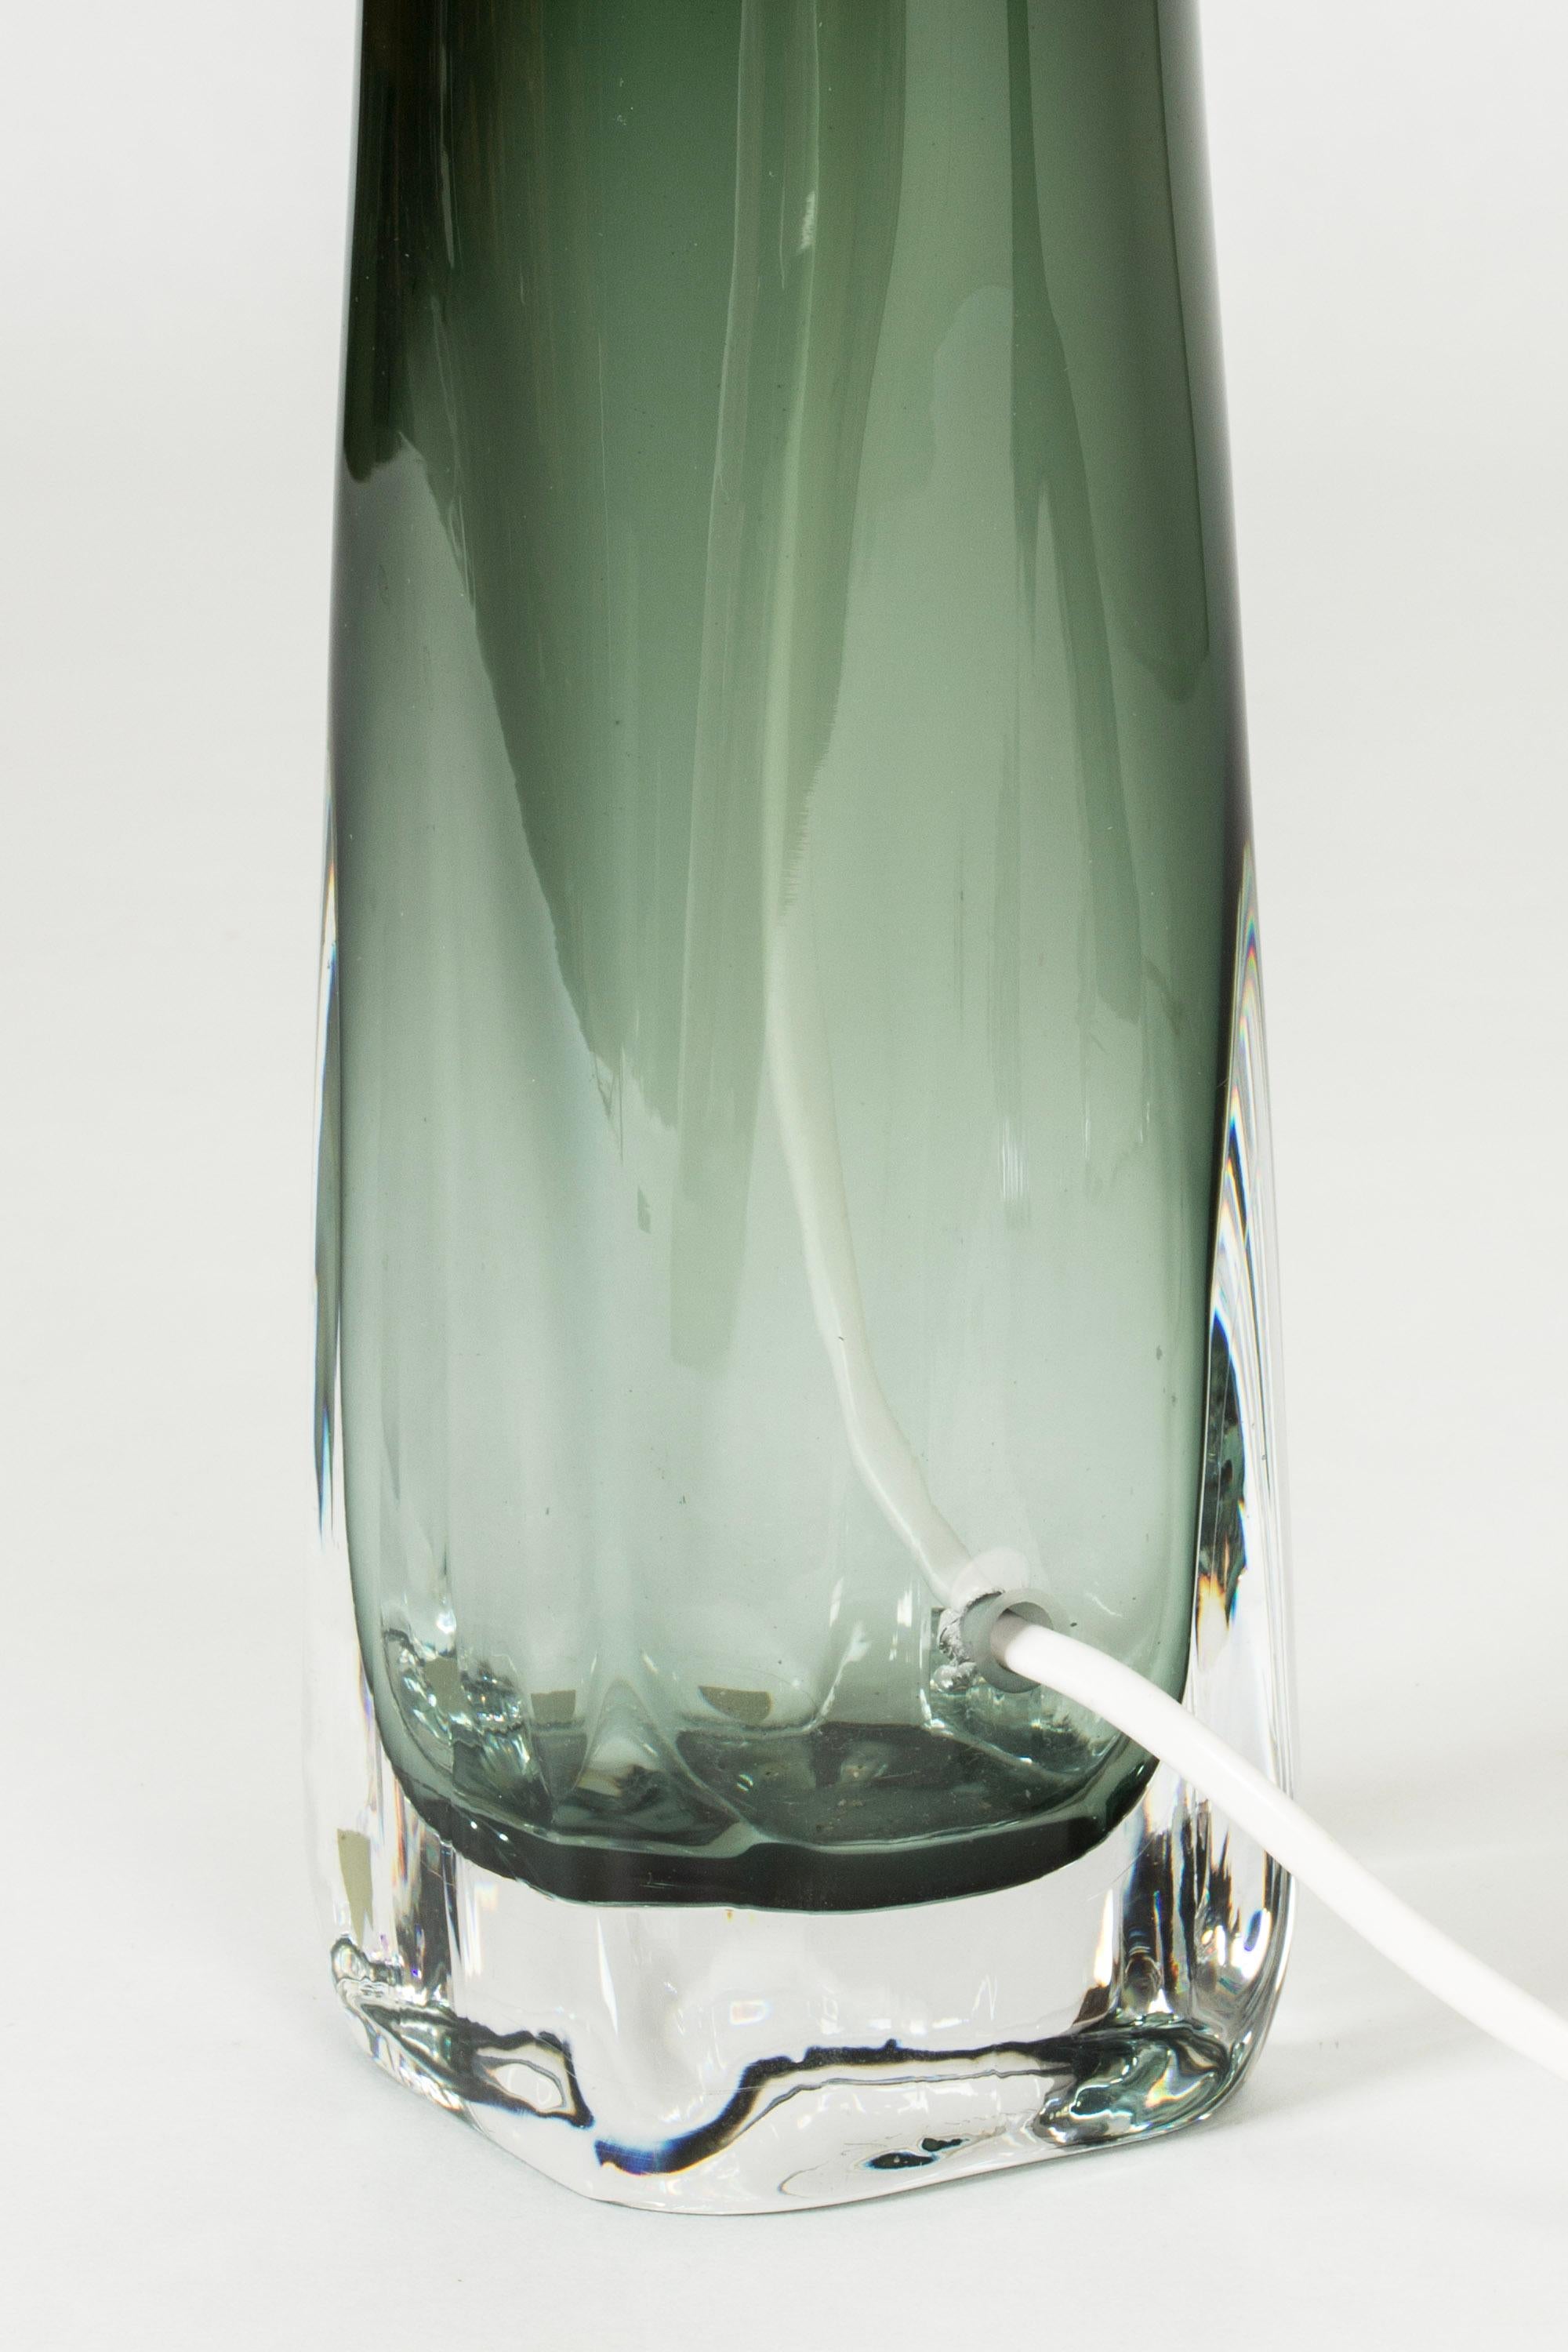 Mid-20th Century Midcentury Glass Table Lamps by Carl Fagerlund, Orrefors, Sweden, 1960s For Sale